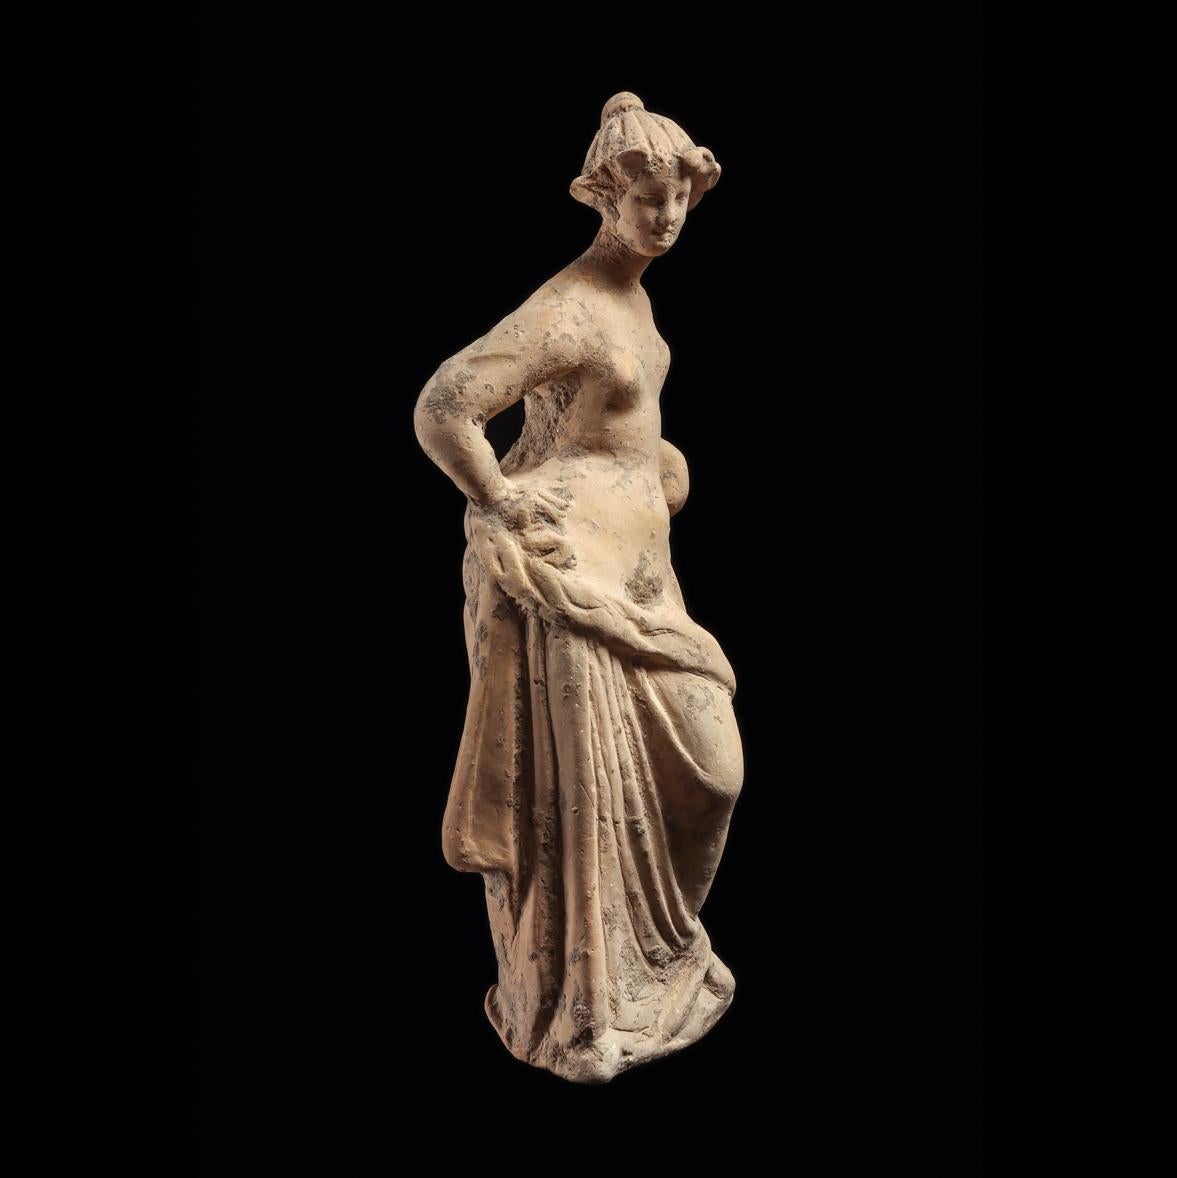 Terracotta statuette of a goddess, likely Aphrodite, leaning on a pillar. Her hair is pulled back into a bun, with framing locks around the forehead and an idealised face. Her left arm is resting on a pillar, right arm is on the hip, which is angled